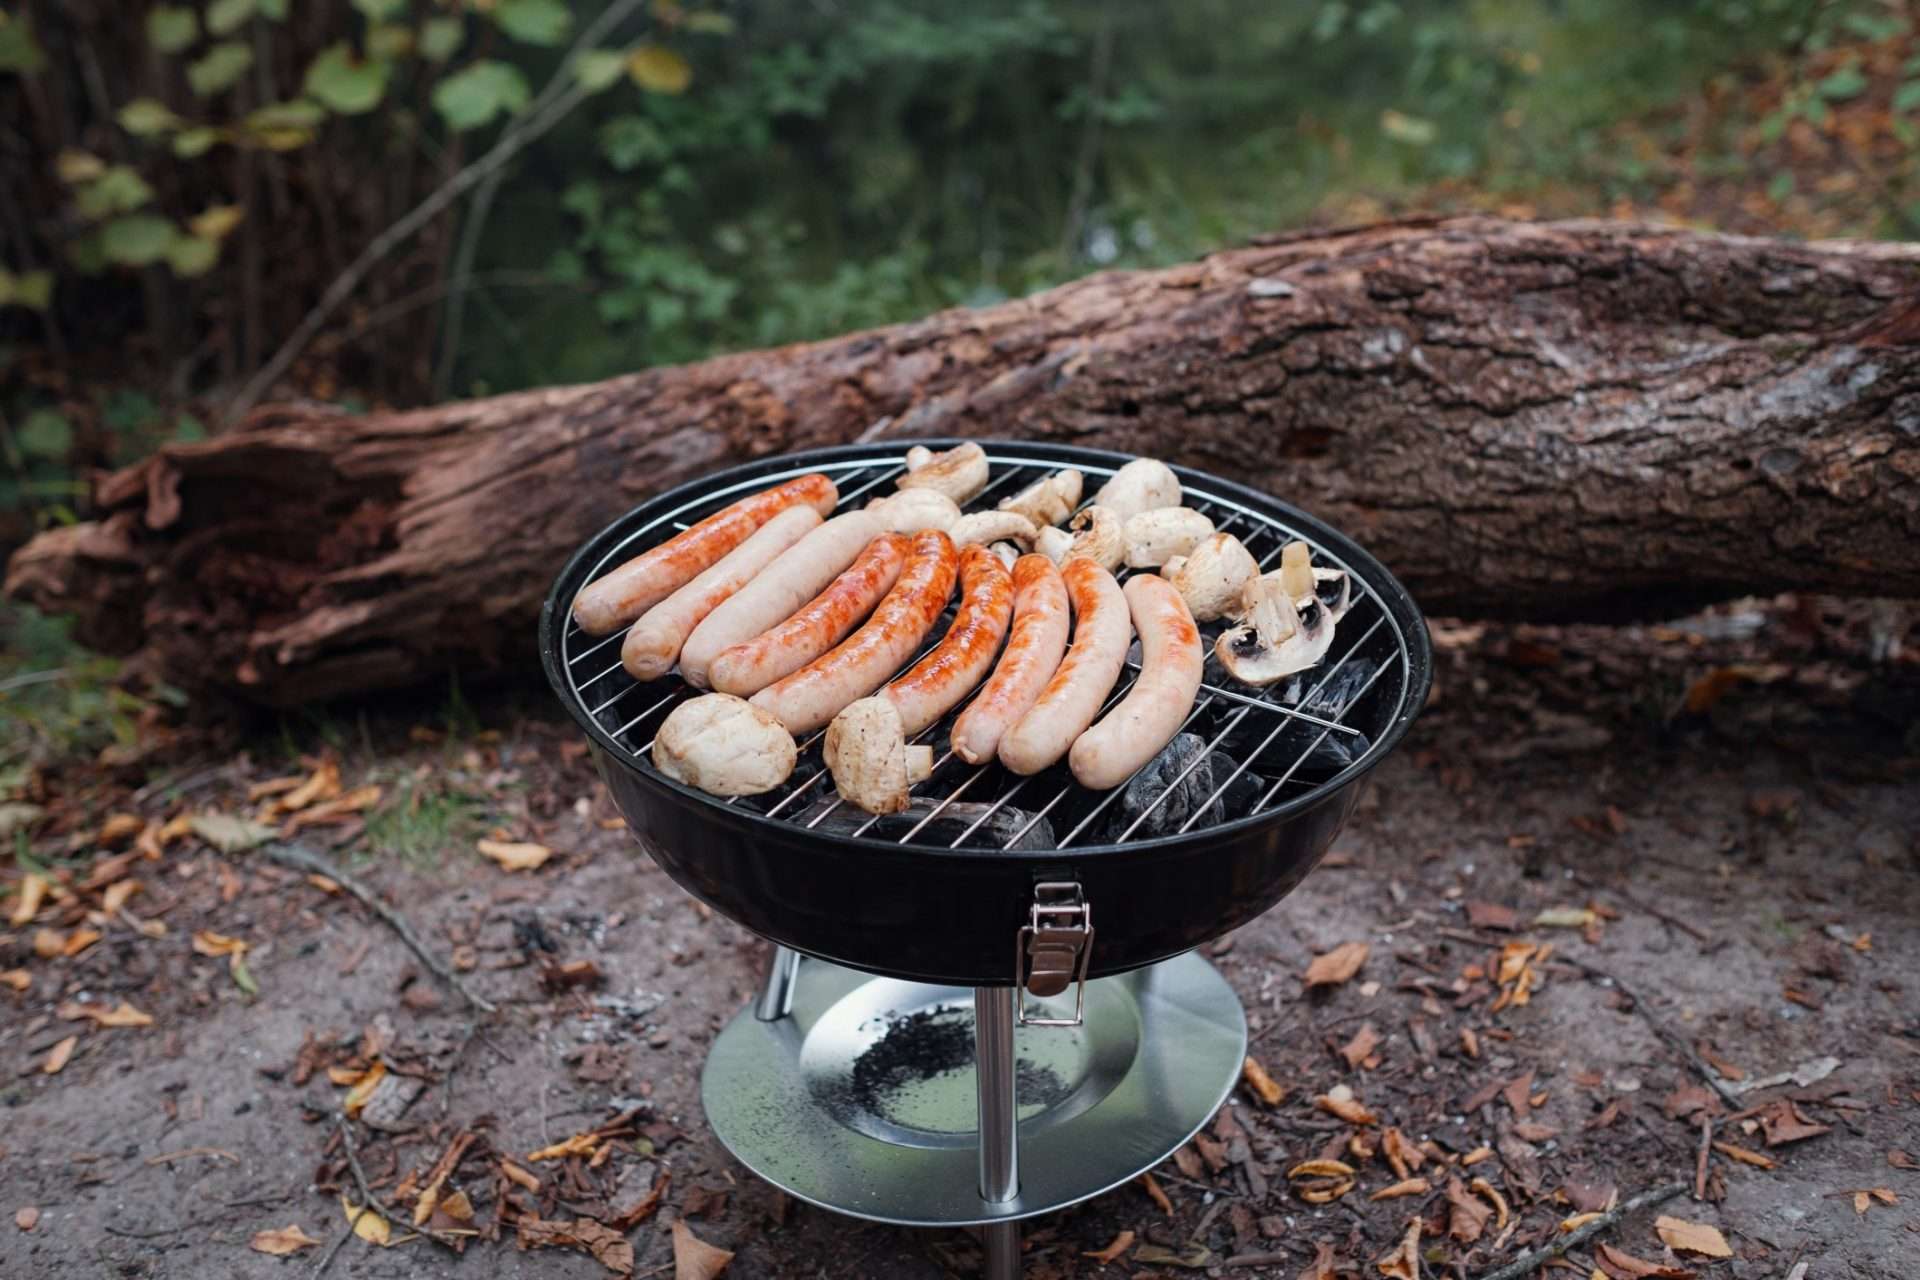 Brats and mushrooms cooking on a portable grill.